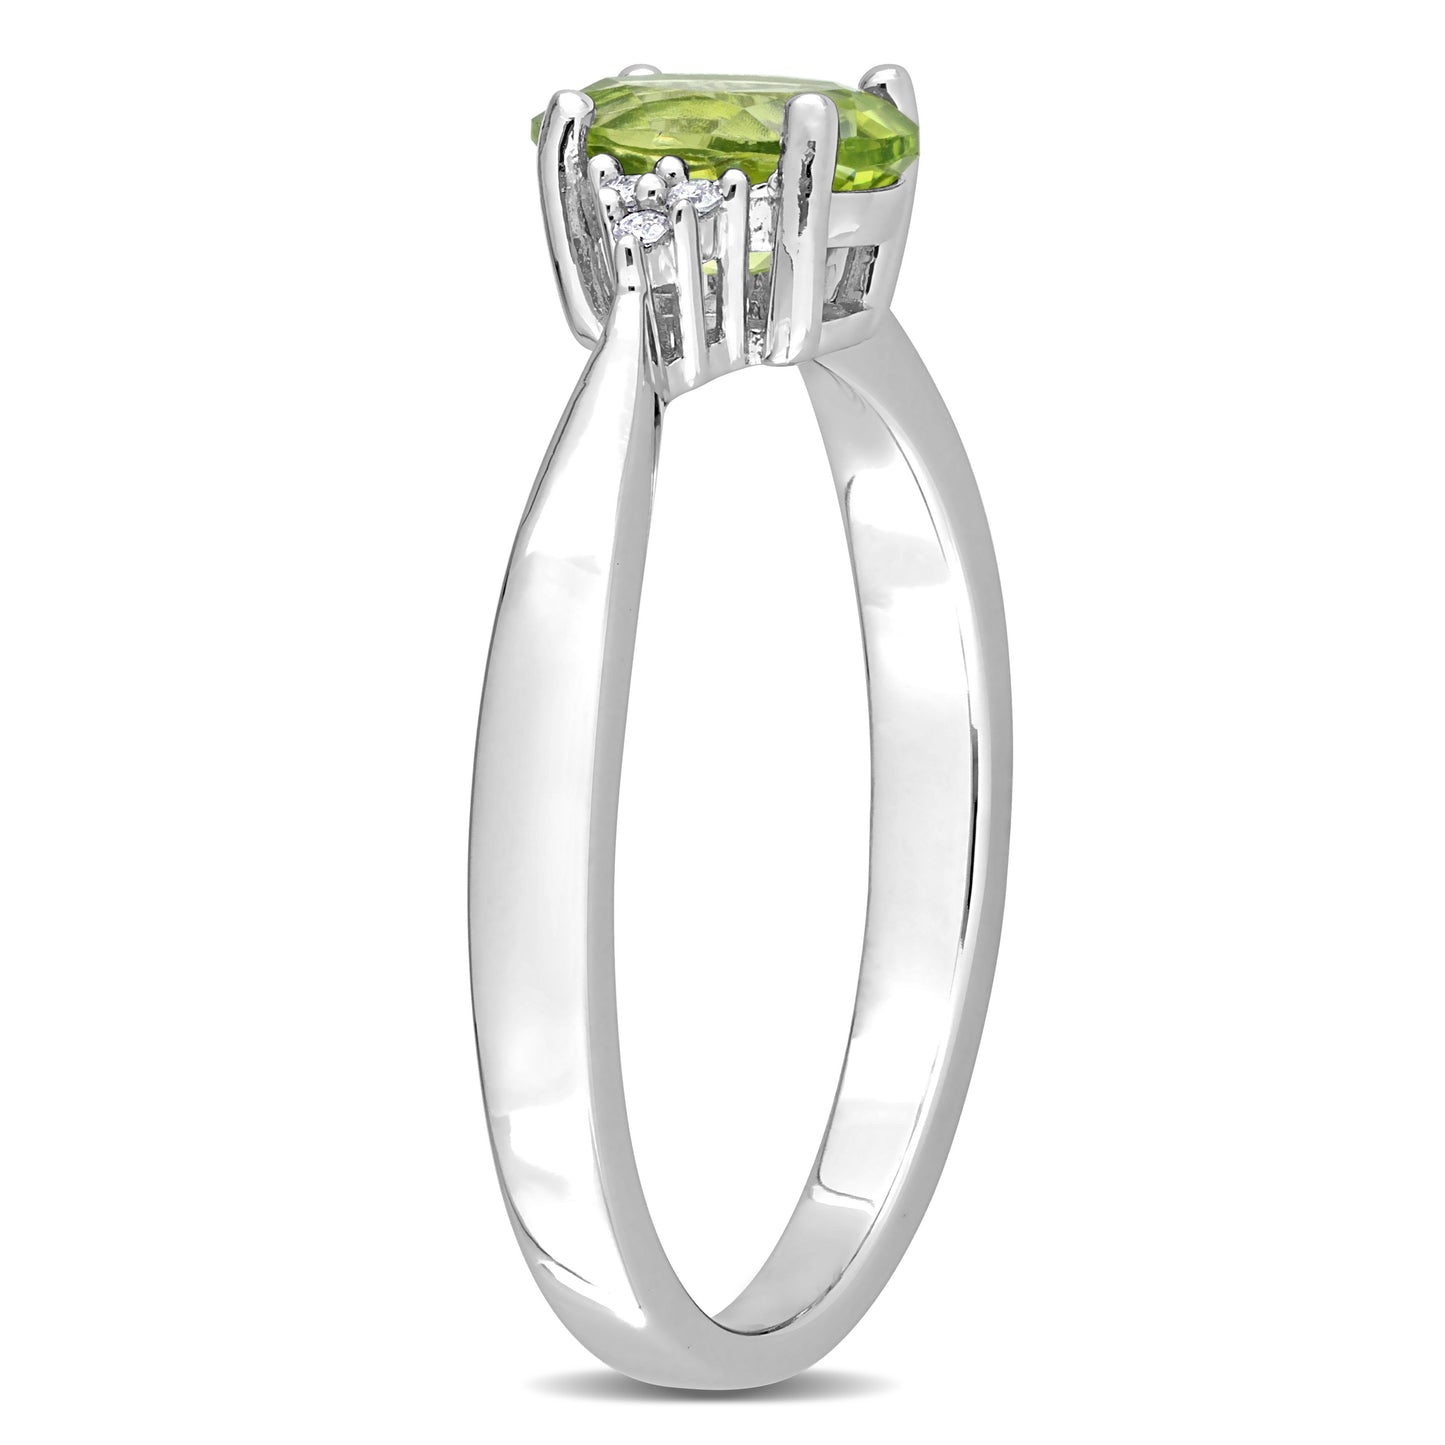 4/5ct Oval Cut Peridot & 0.03ct Diamond Ring in Sterling Silver